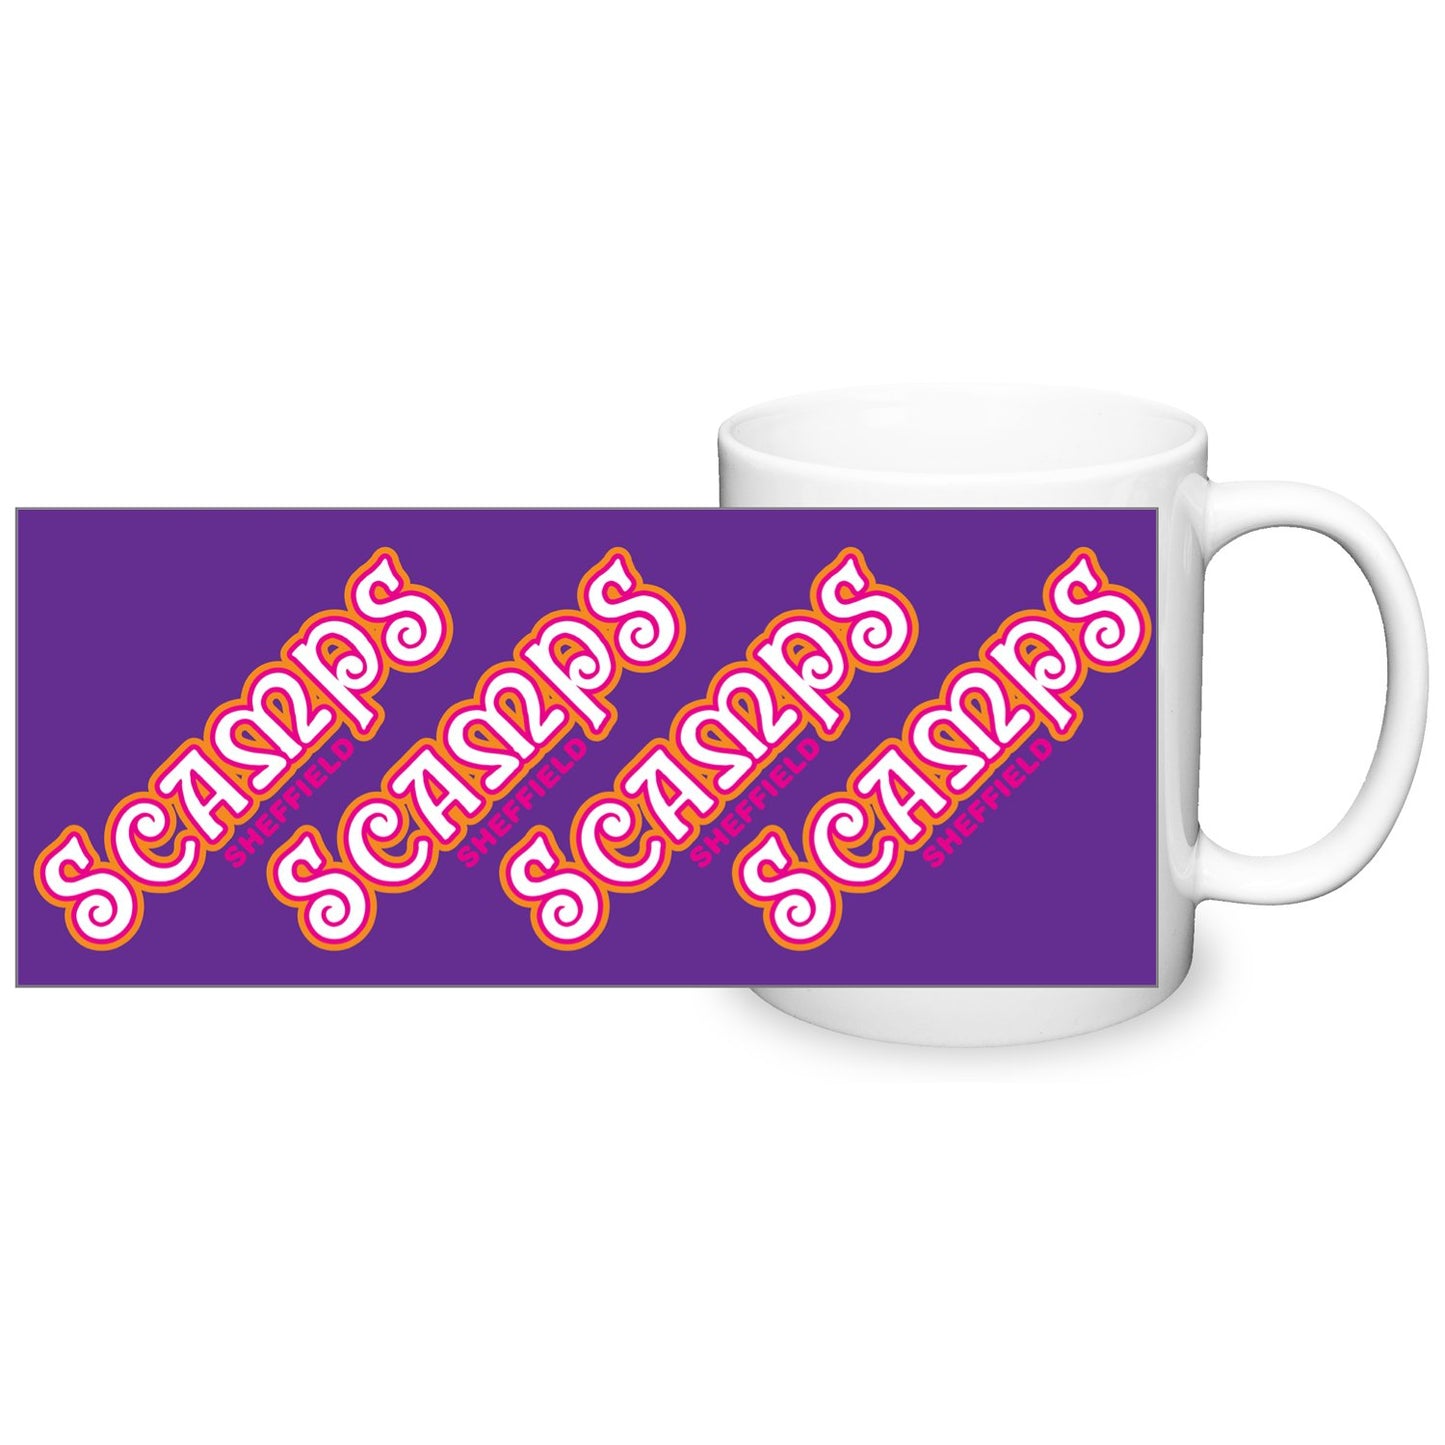 Scamps mug - Dirty Stop Outs